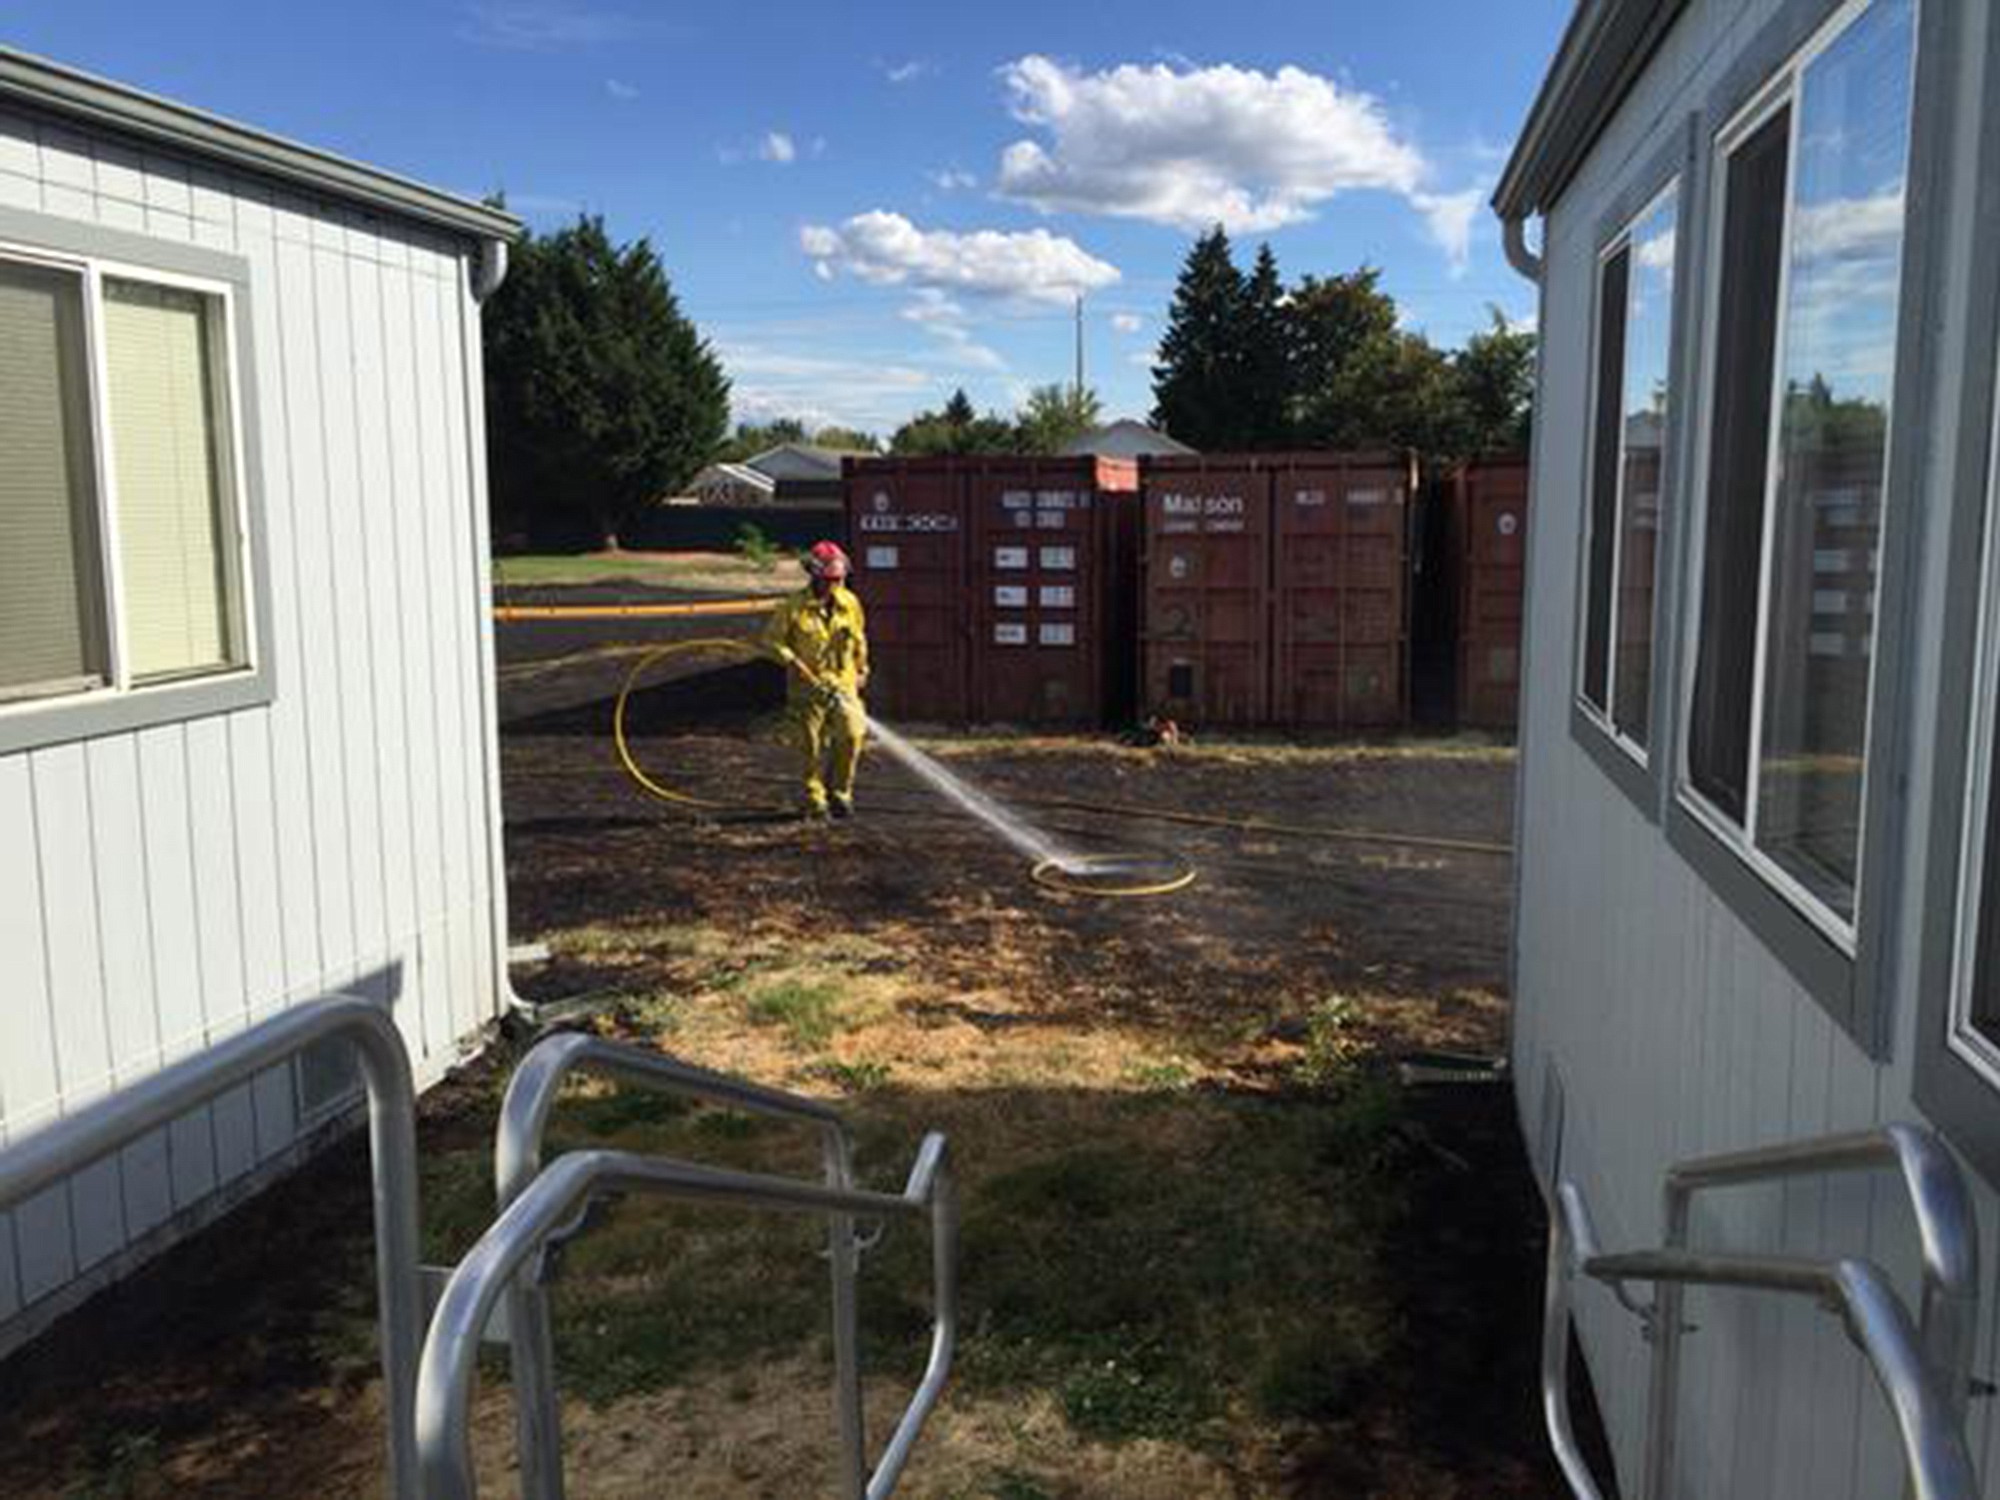 Courtesy of Radar Gossip
Fires on Sunday afternoon at Heritage High School scorched grass and the outside of a portable building. Two juveniles could face charges in the incident, officials said.